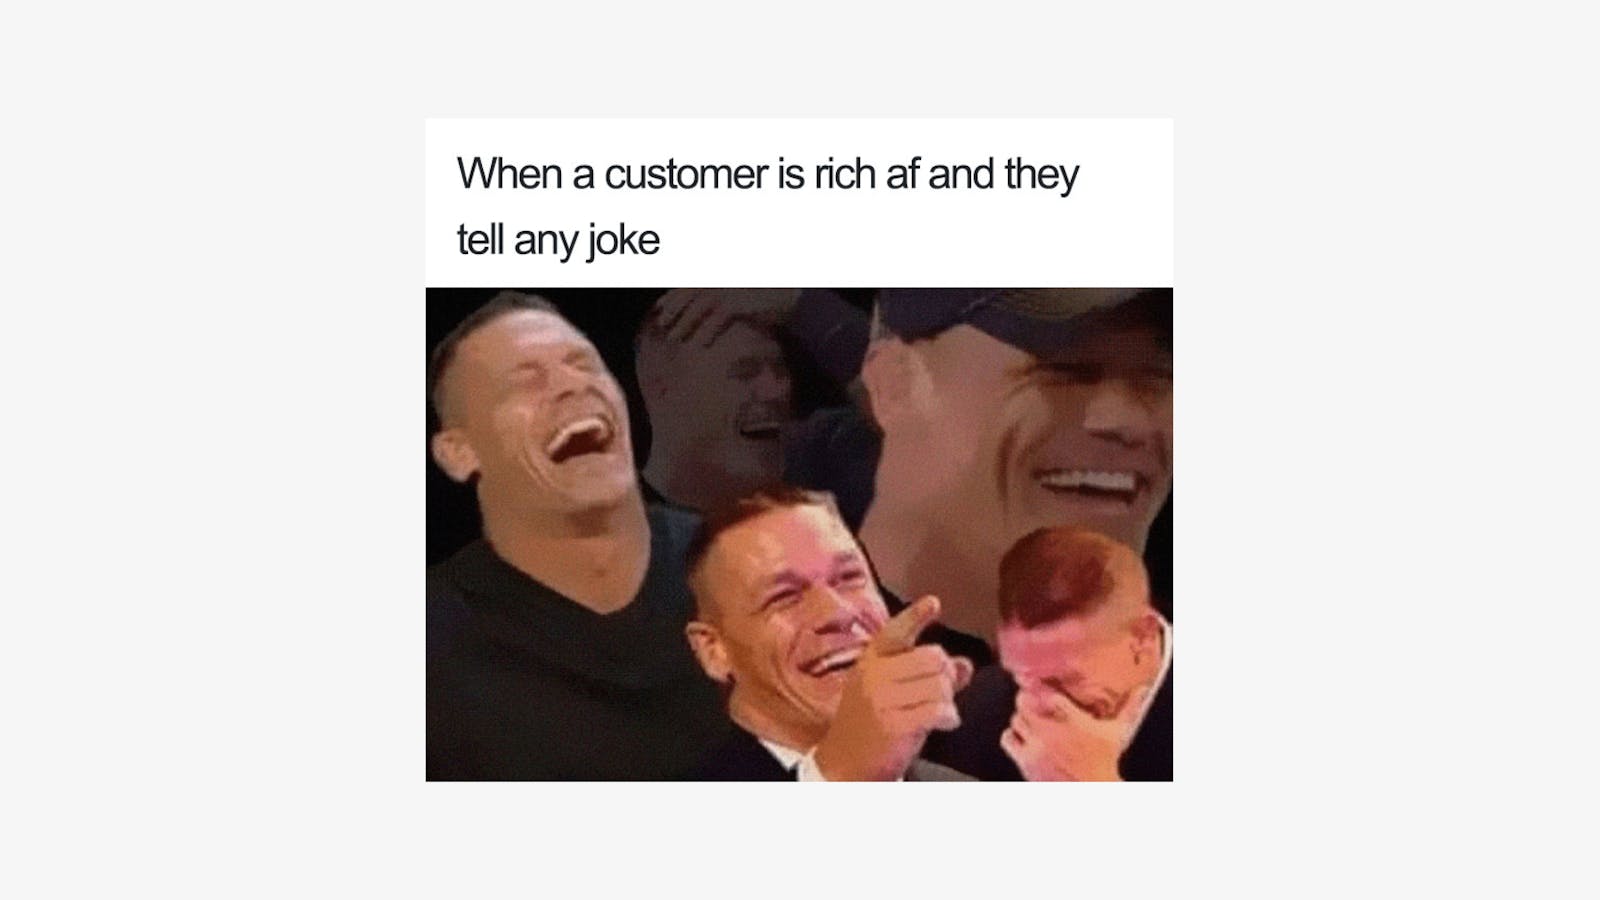 Hilarious restaurant meme "when a customer is rich af and they tell any joke" with John Cena laughing. 